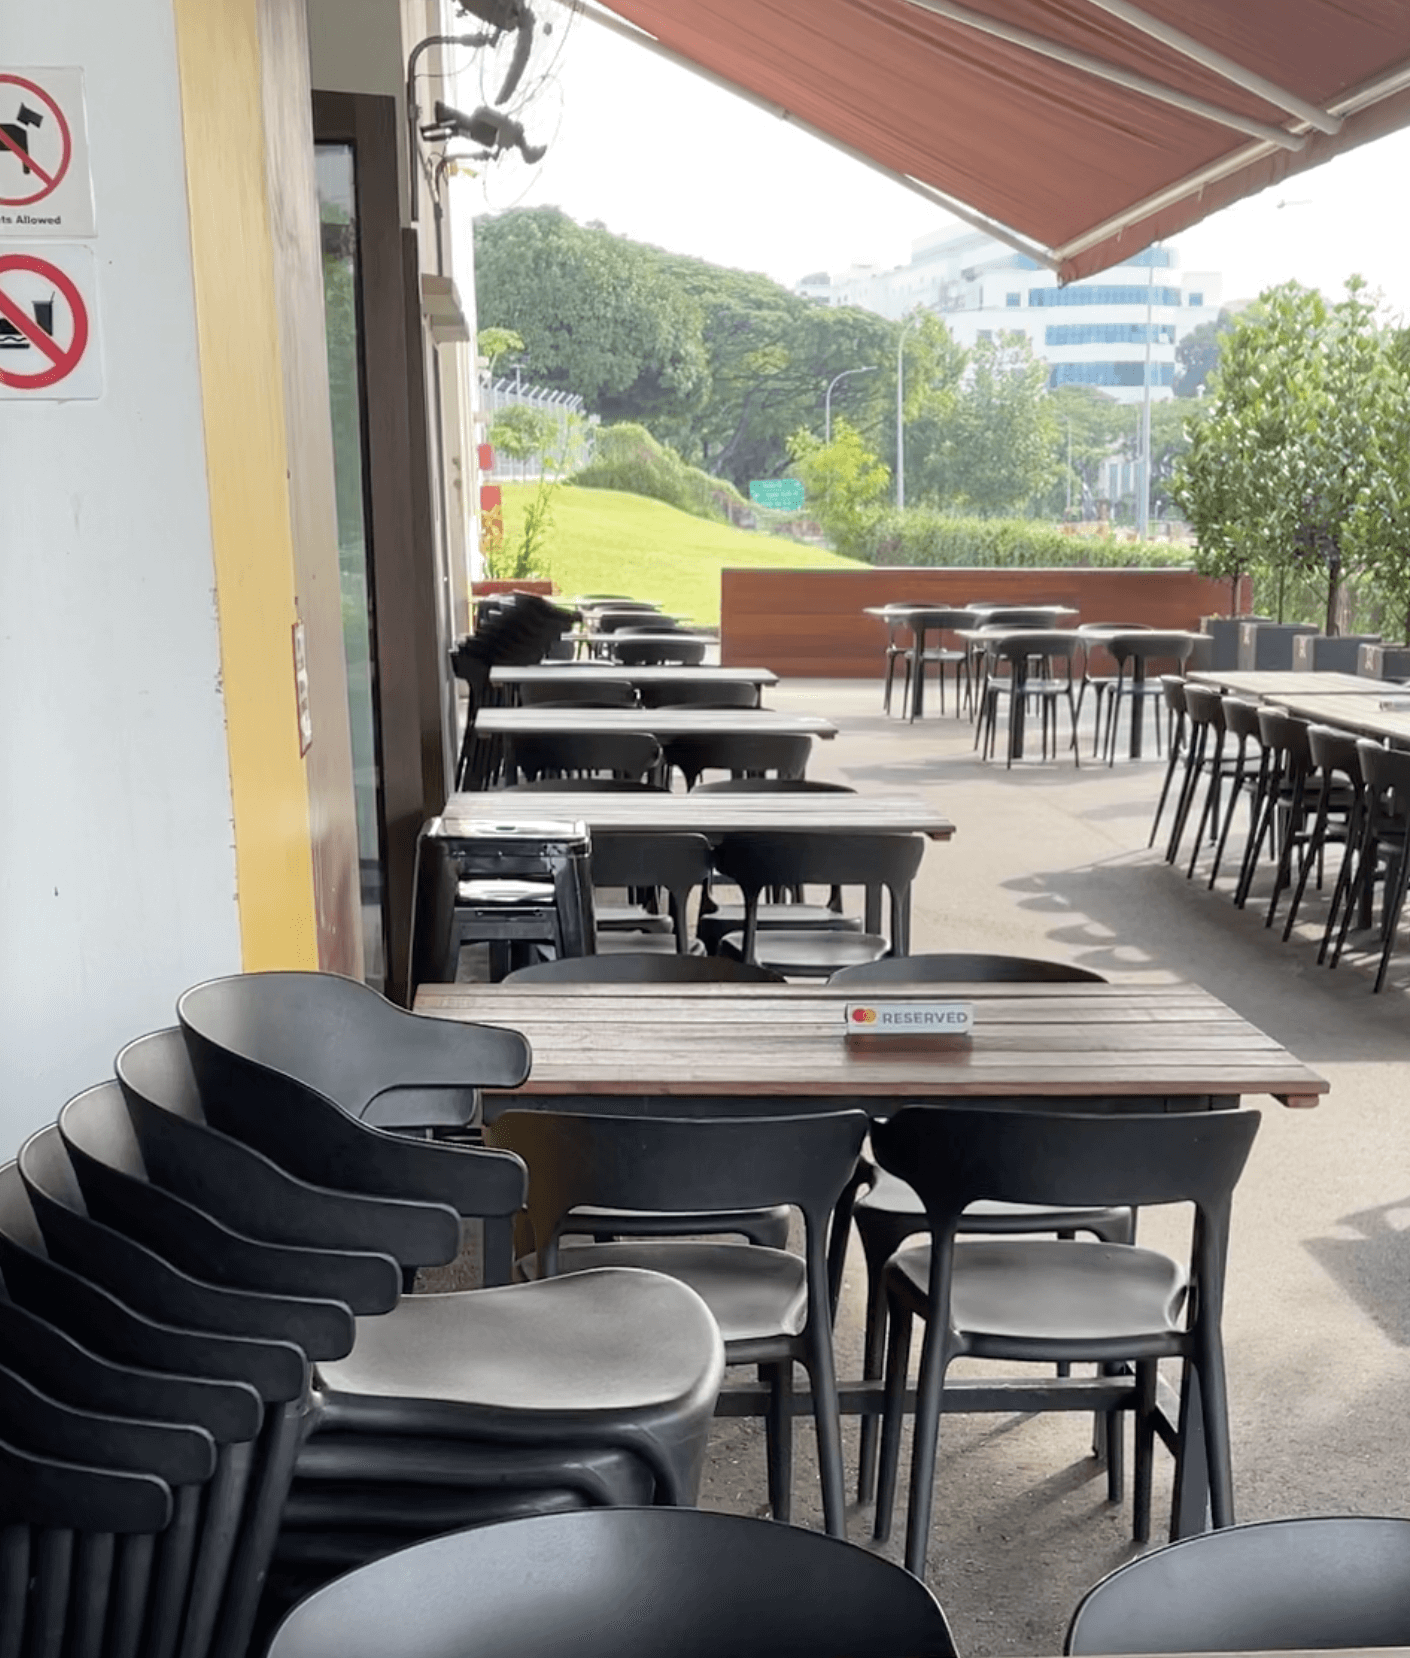 "Terrace Building" Strata Area 13,762sqft Canteen For Sale! 